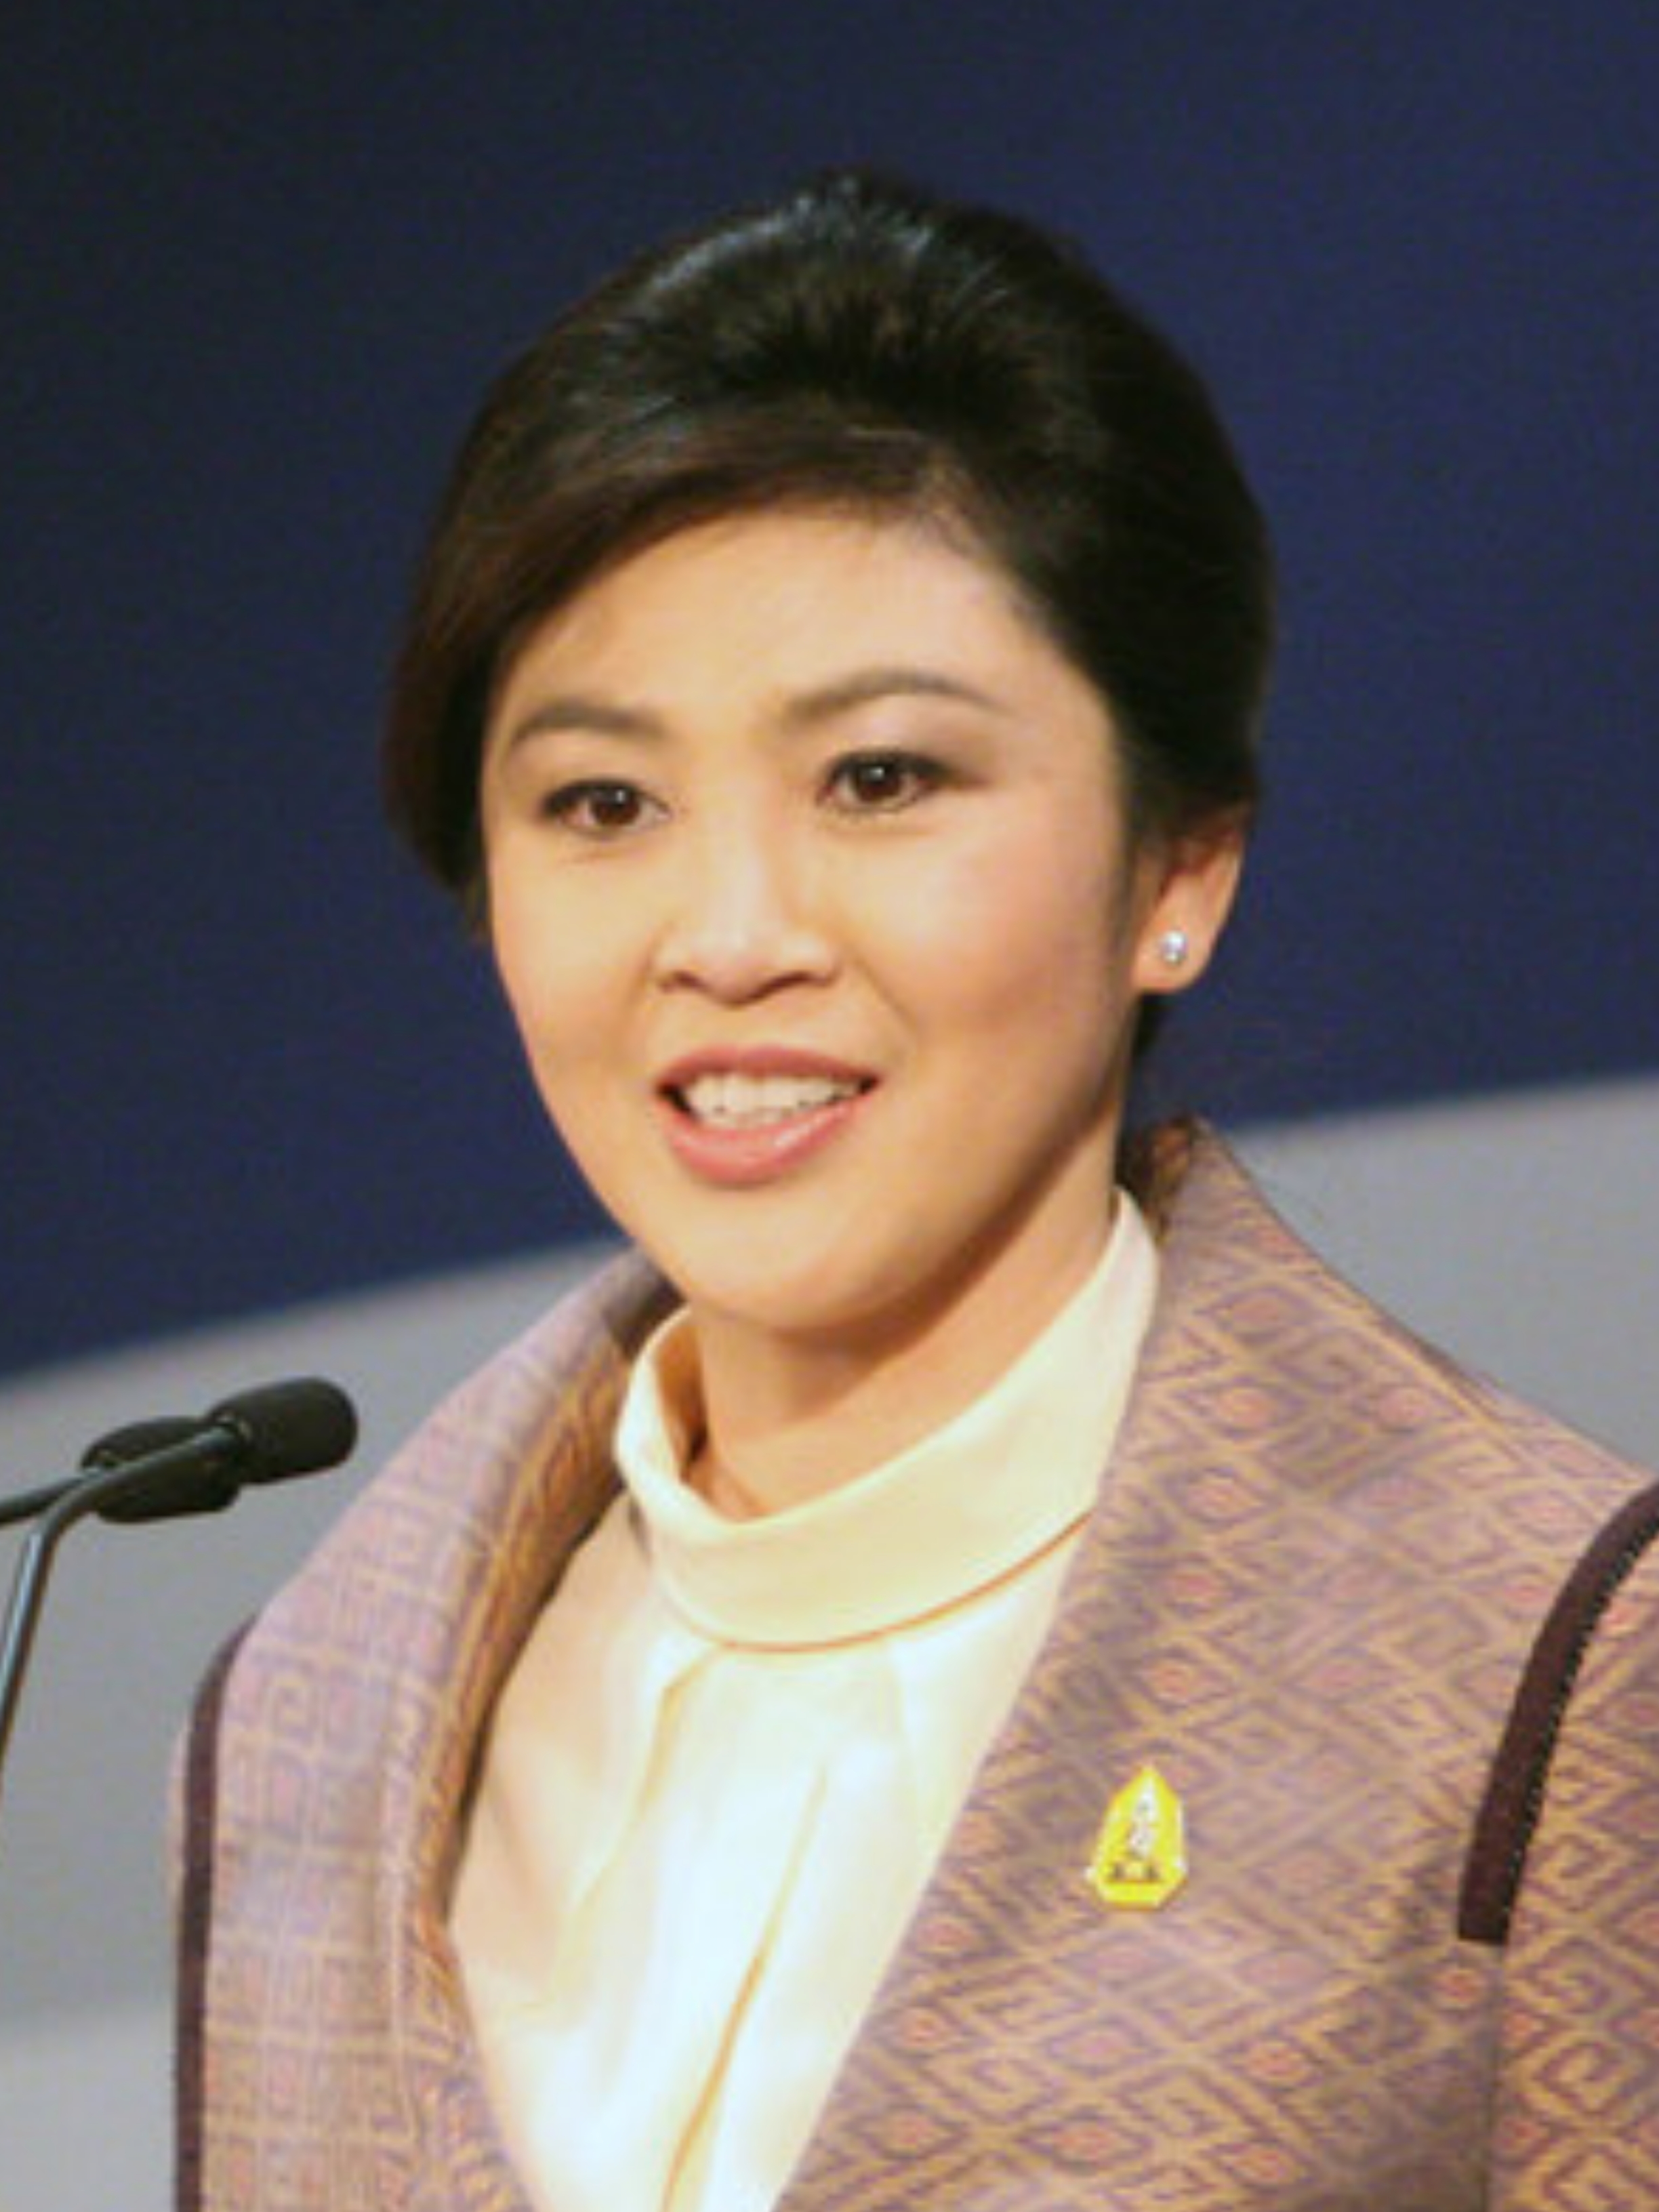 https://upload.wikimedia.org/wikipedia/commons/a/a4/Prime_Minister_of_Thailand_%288182792228%29_cropped.jpg